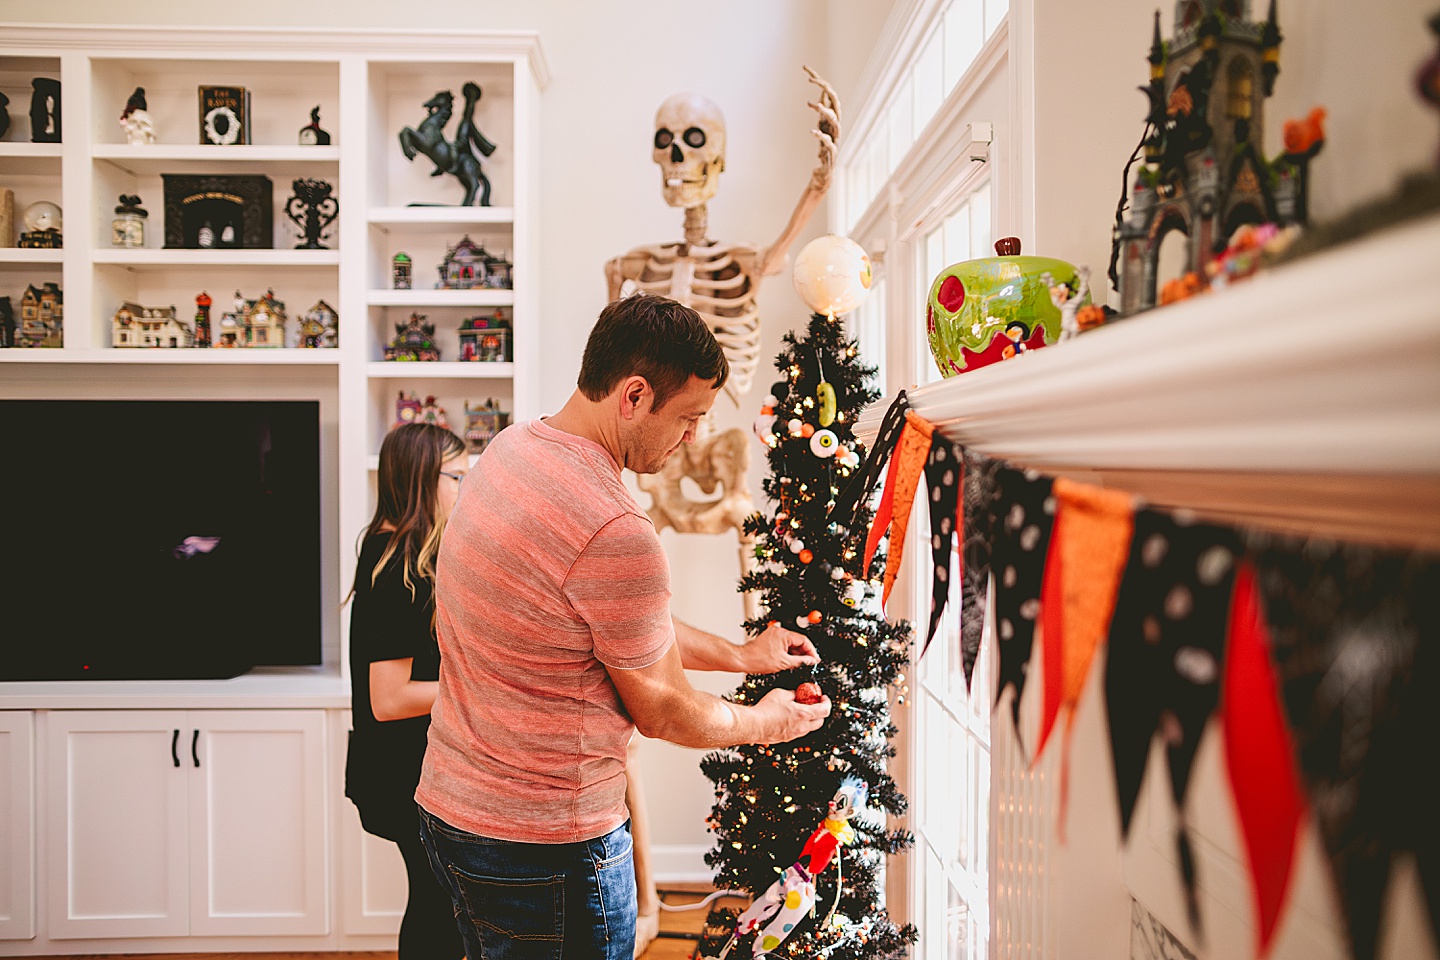 Family decorating black Halloween tree with horror ornaments